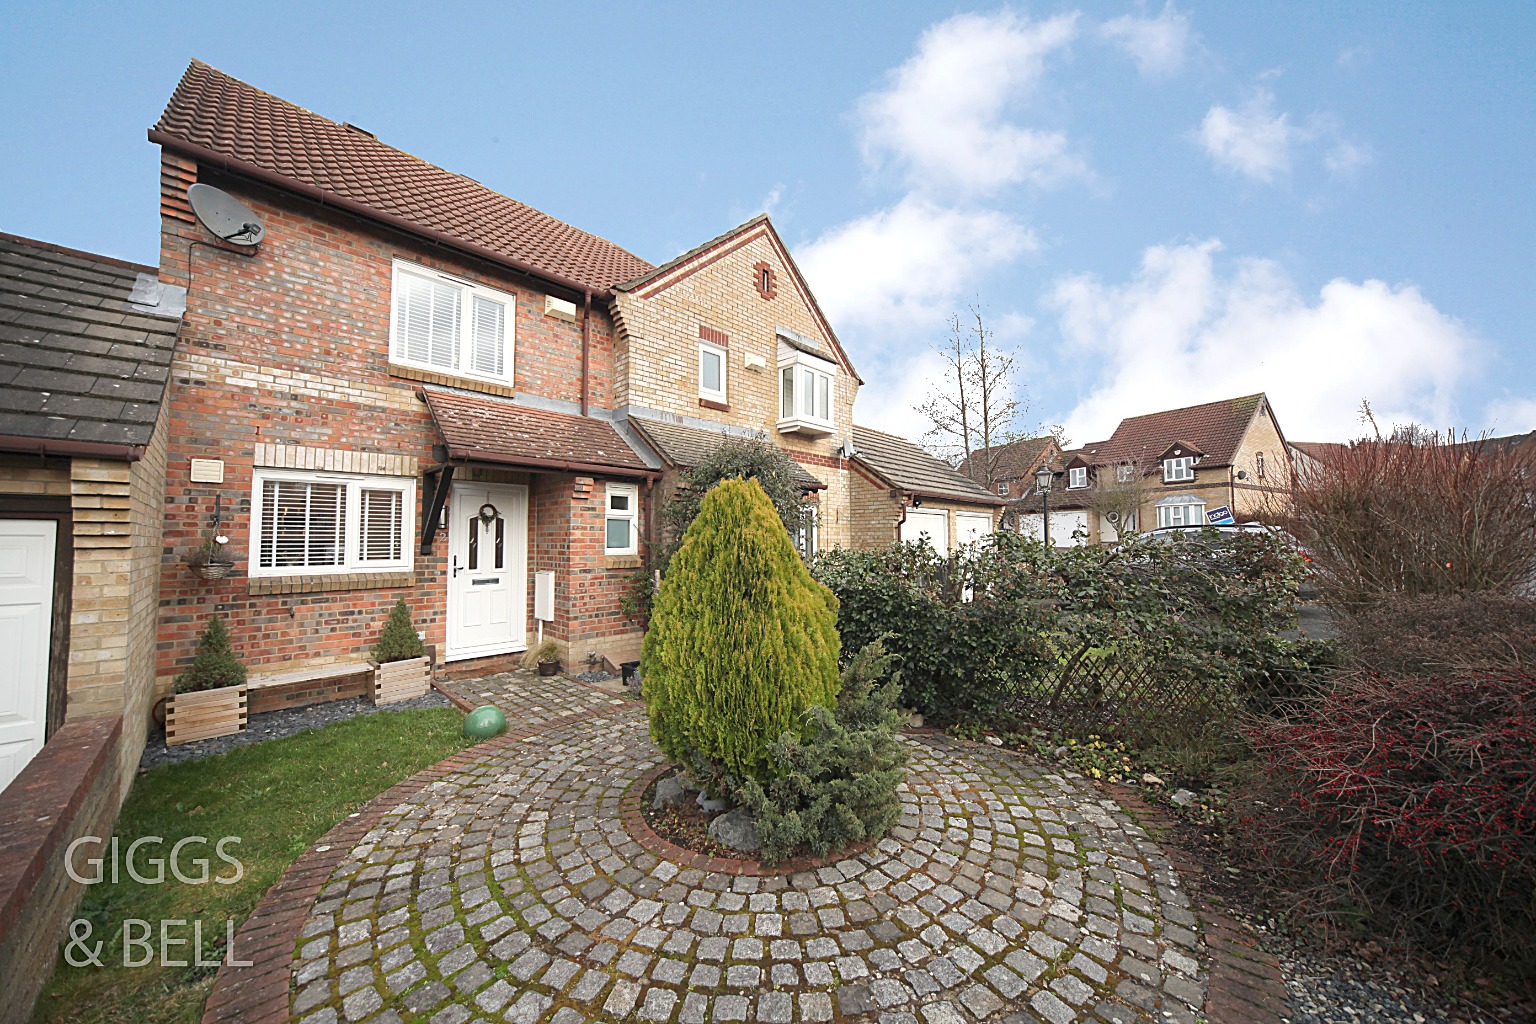 2 bed semi-detached house for sale in The Belfry, Luton, LU2 